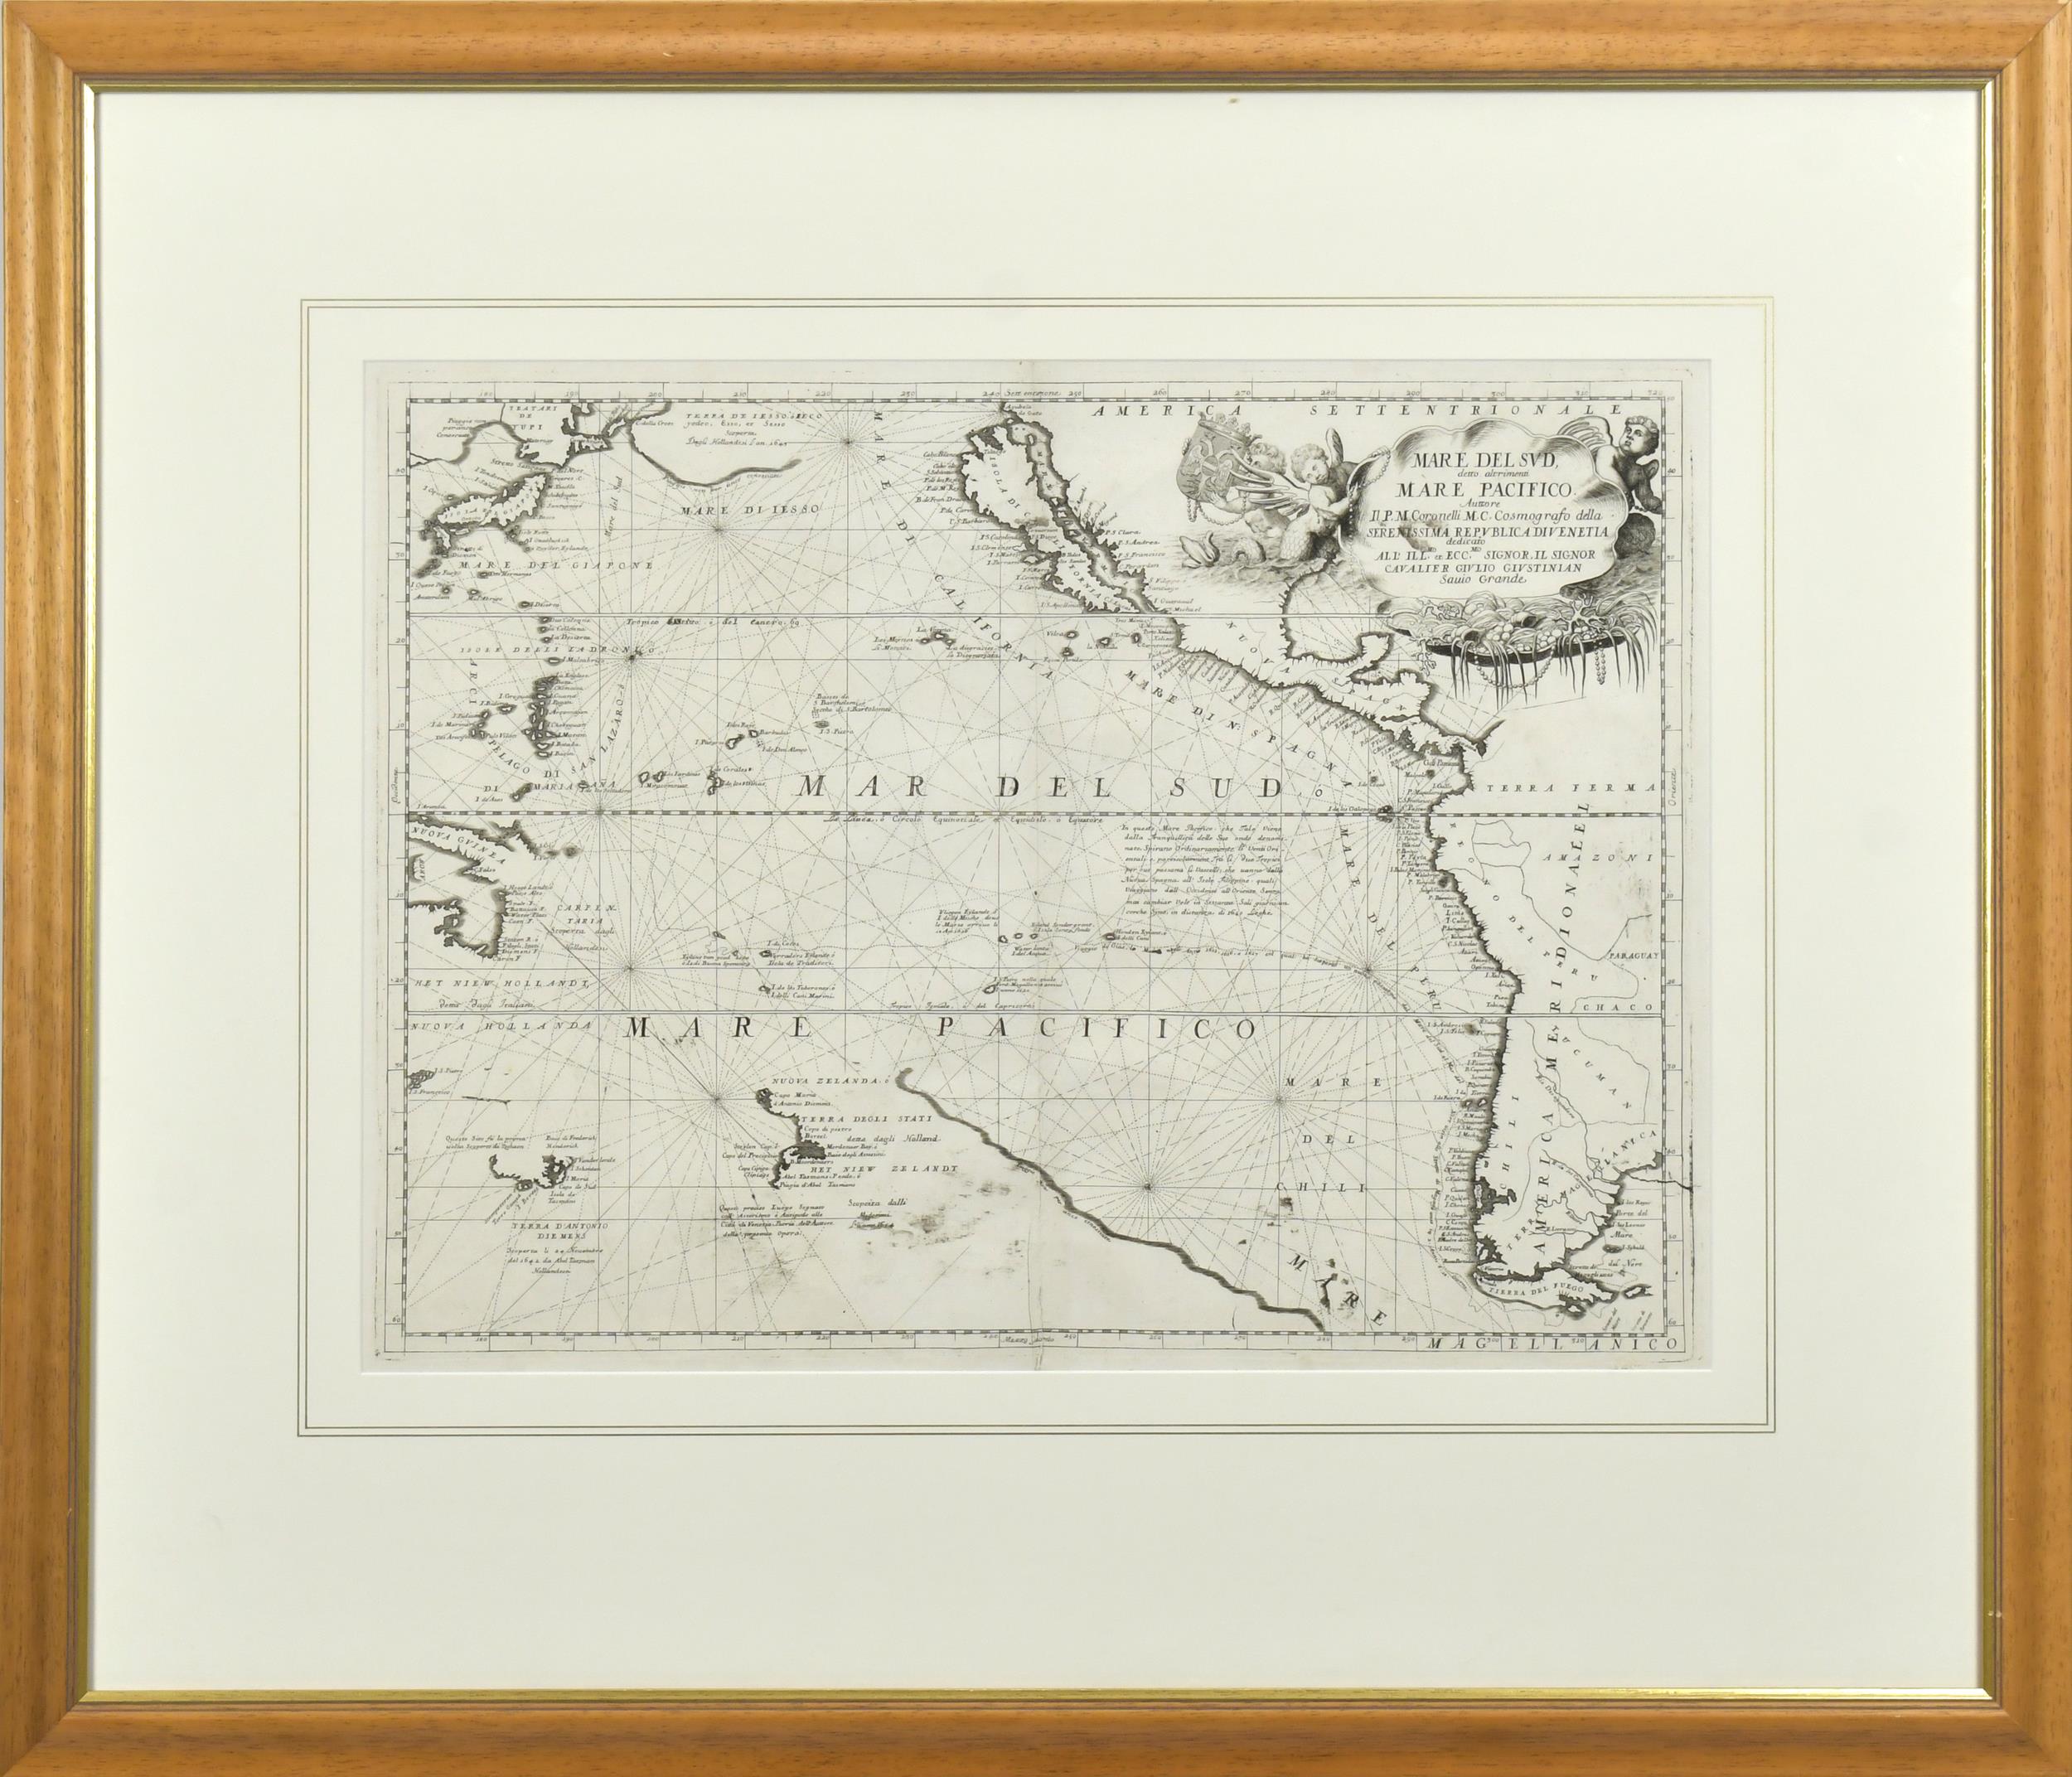 ENGRAVED MAP, PACIFIC OCEAN, BY CORONELLI.